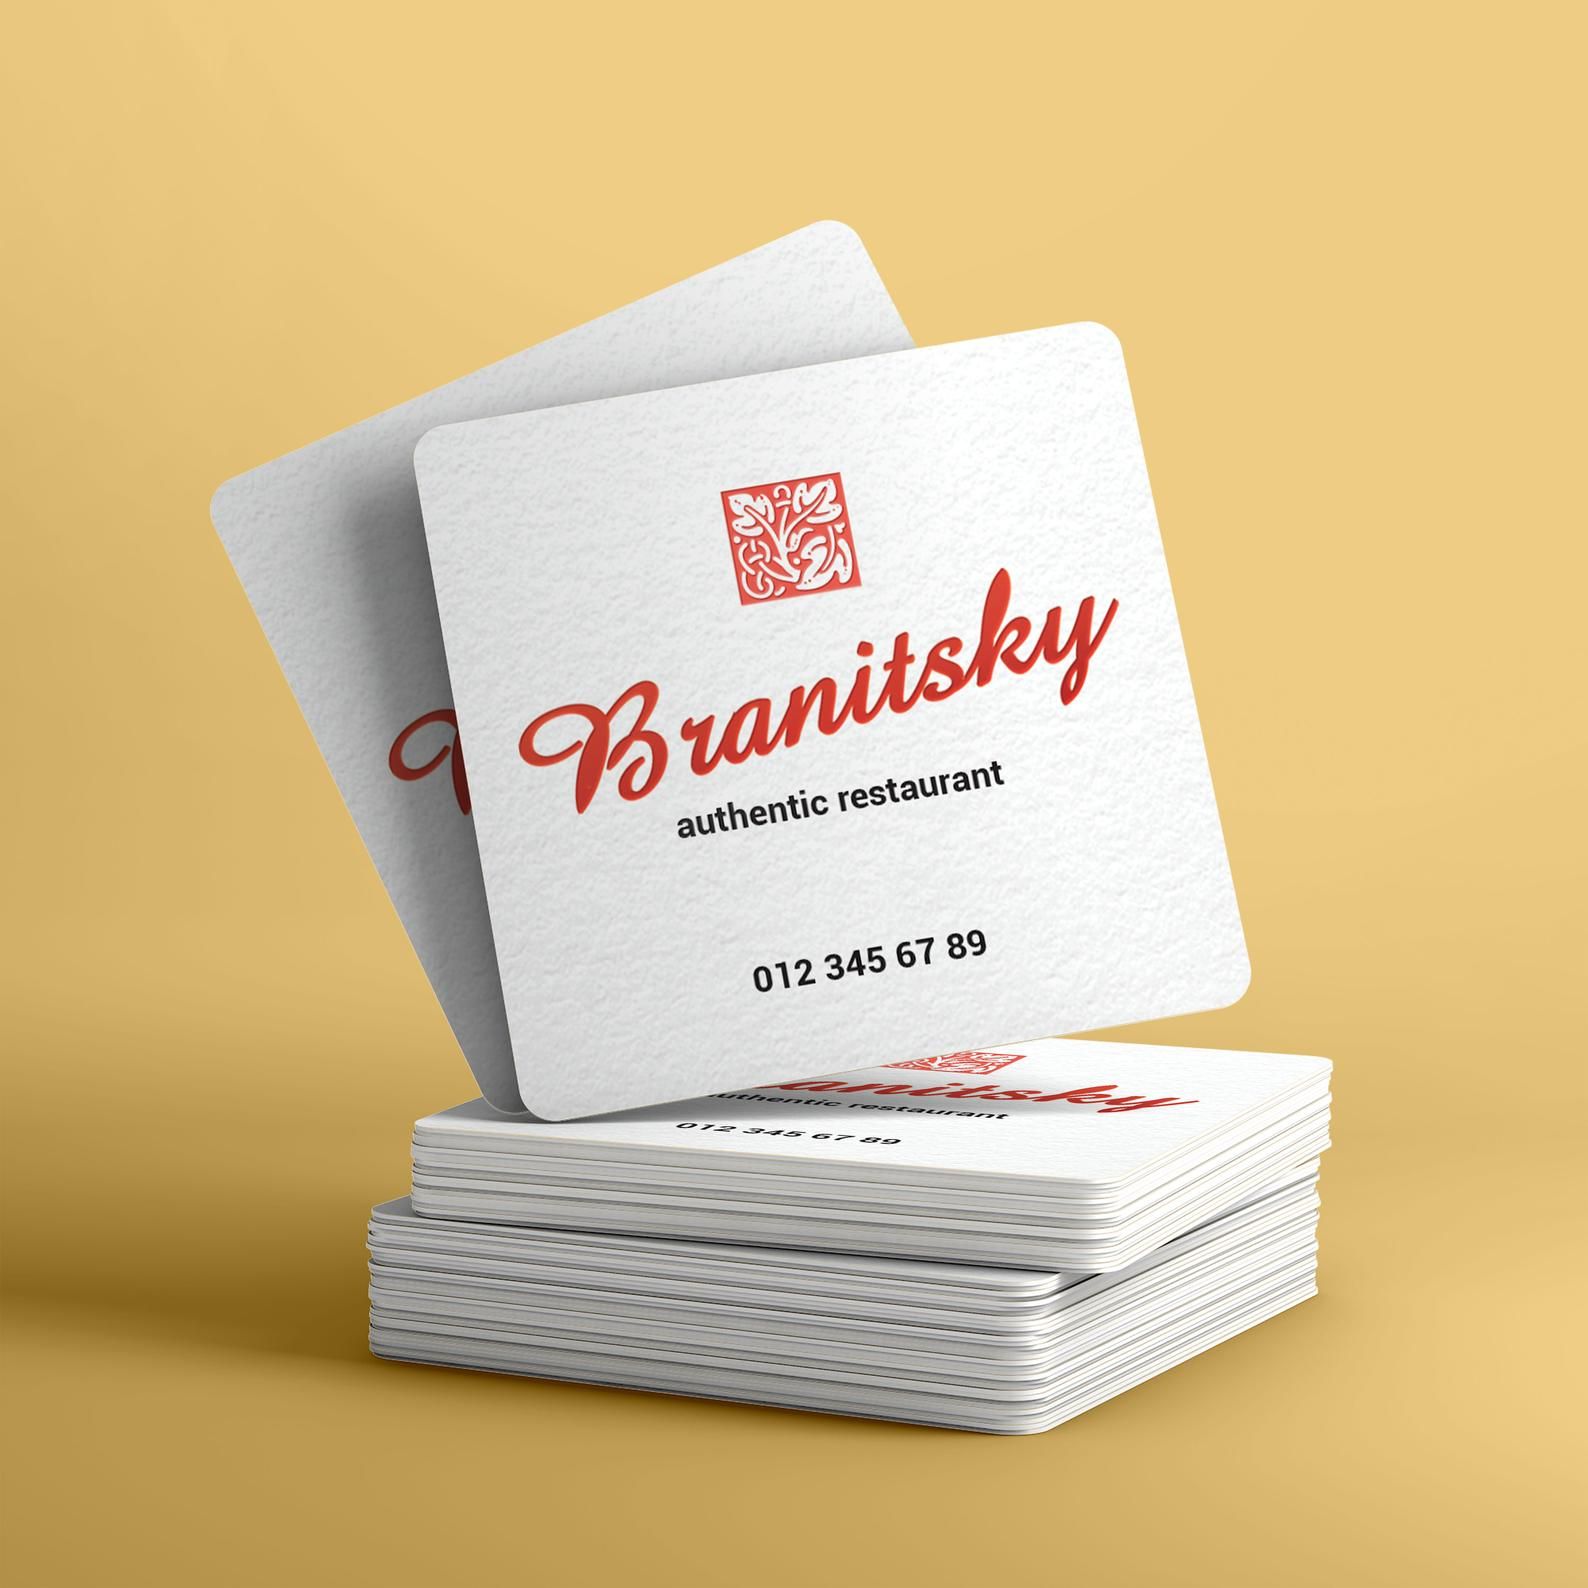 rounded corner square business cards 2